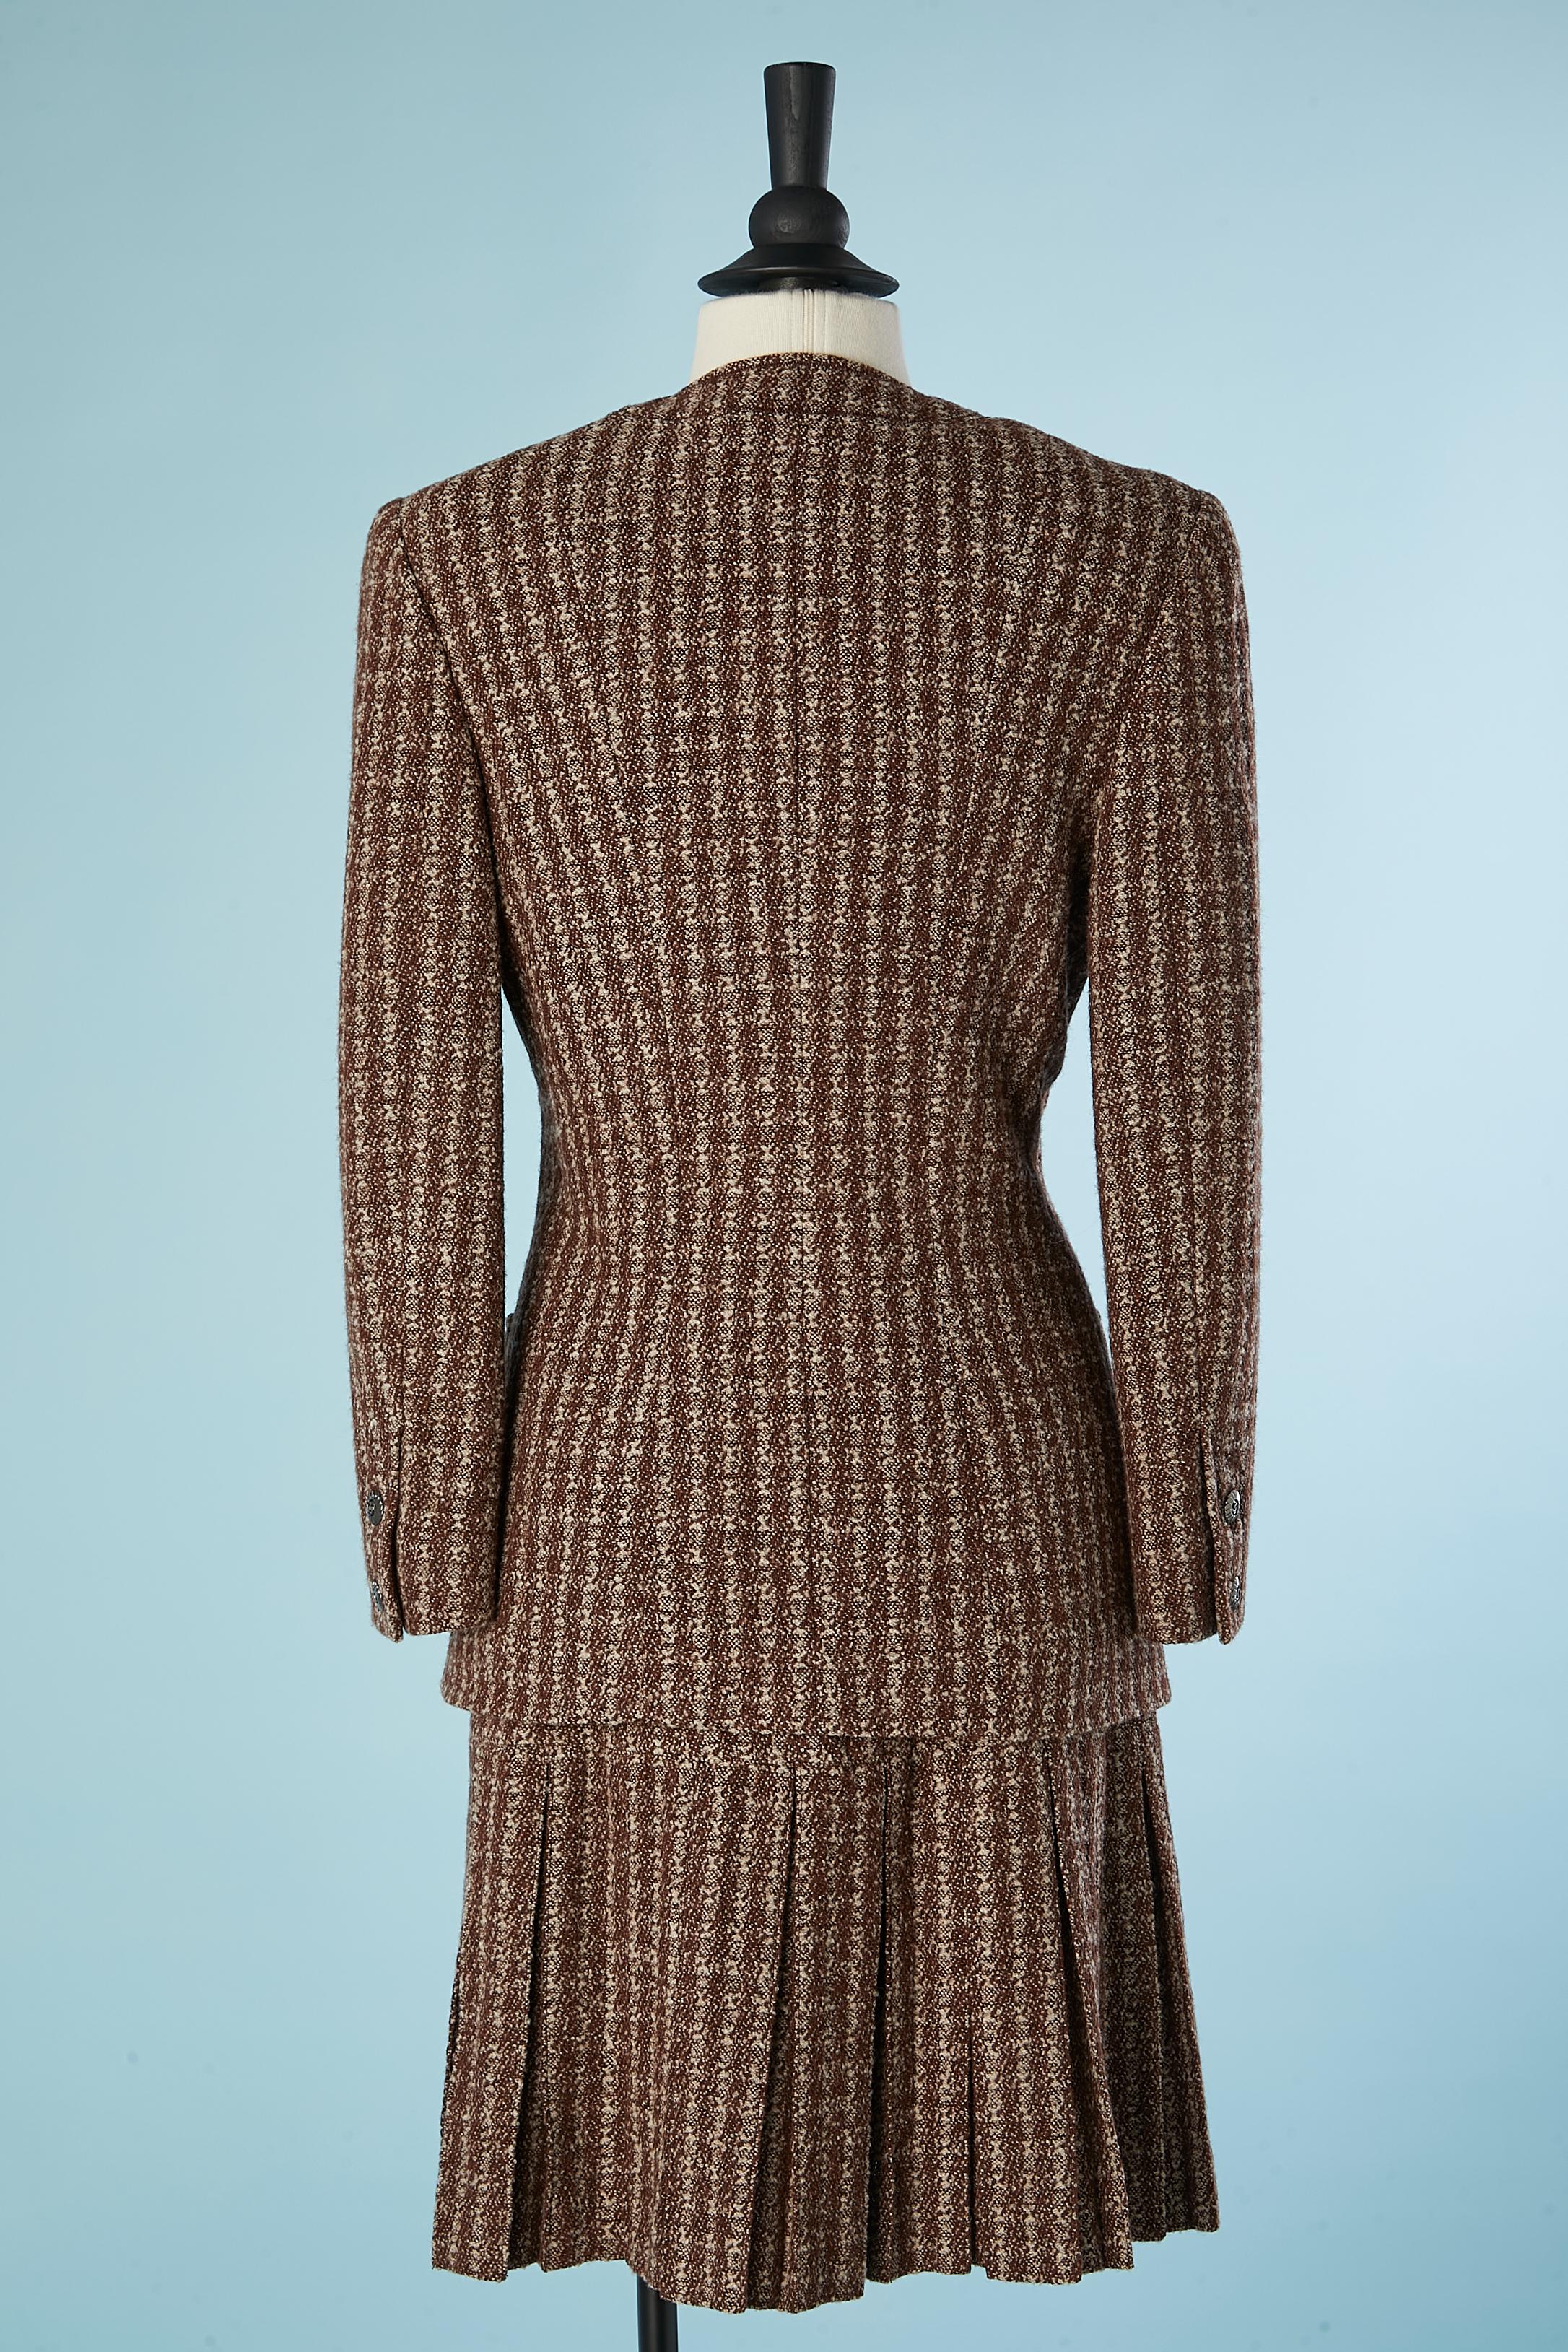 Brown tweed skirt-suit with pleated skirt Chanel Boutique  For Sale 4